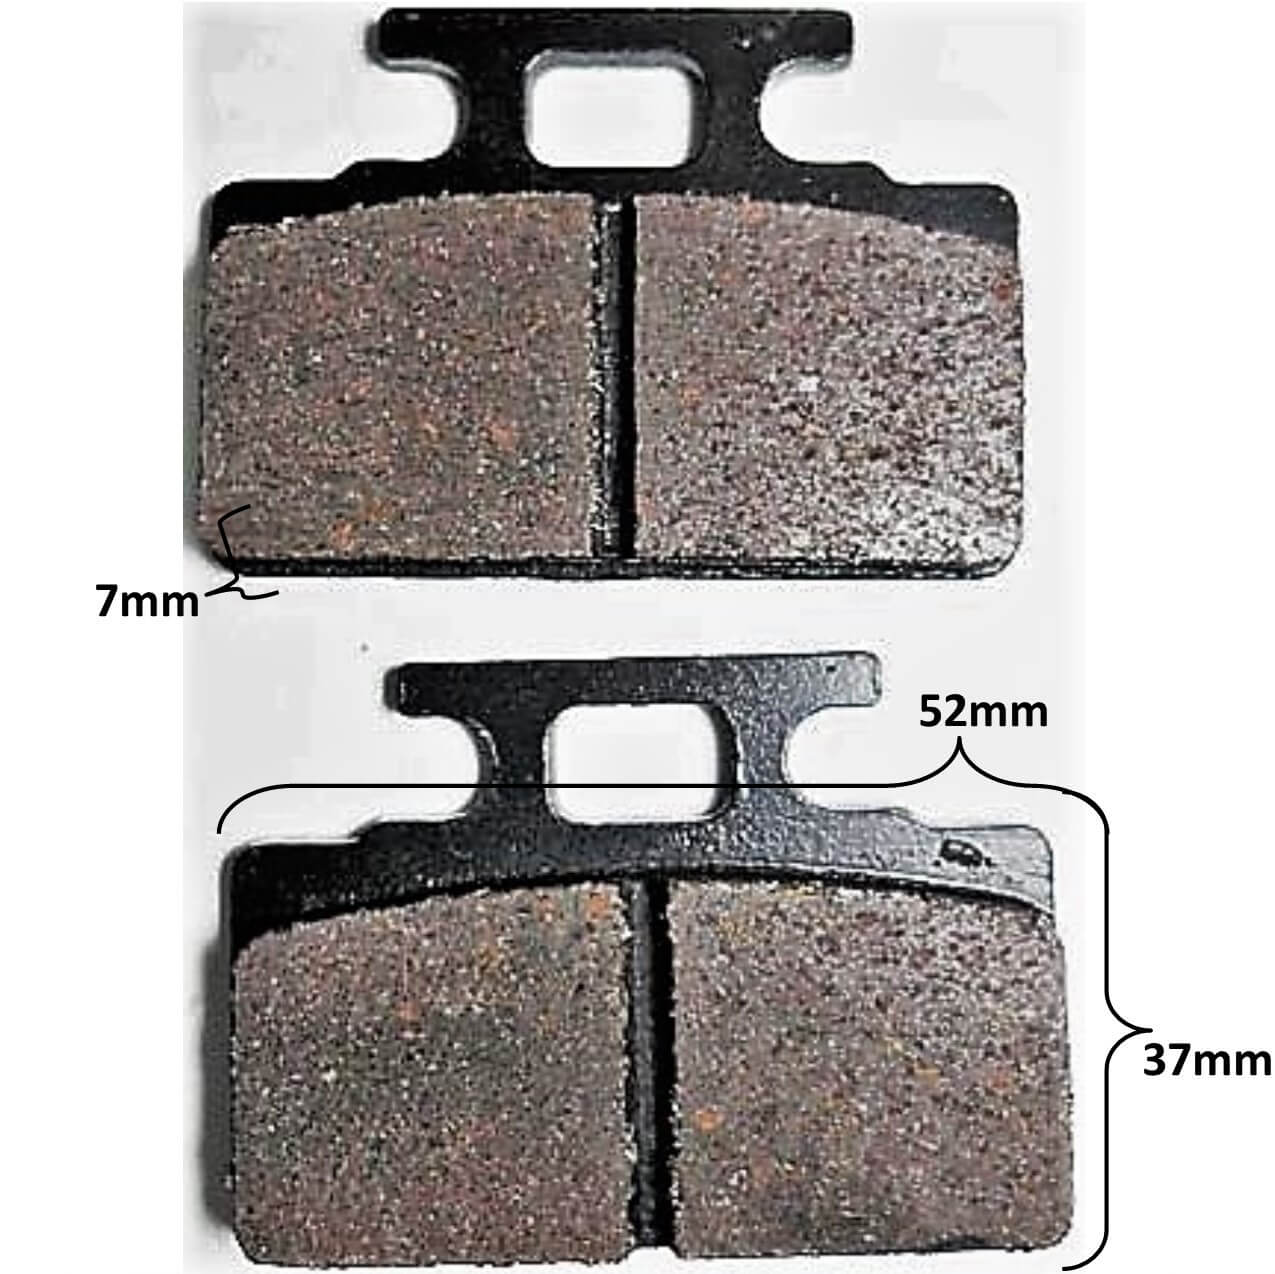 Disc Brake Pads Fits Many Chinese Scooters 52x37x7